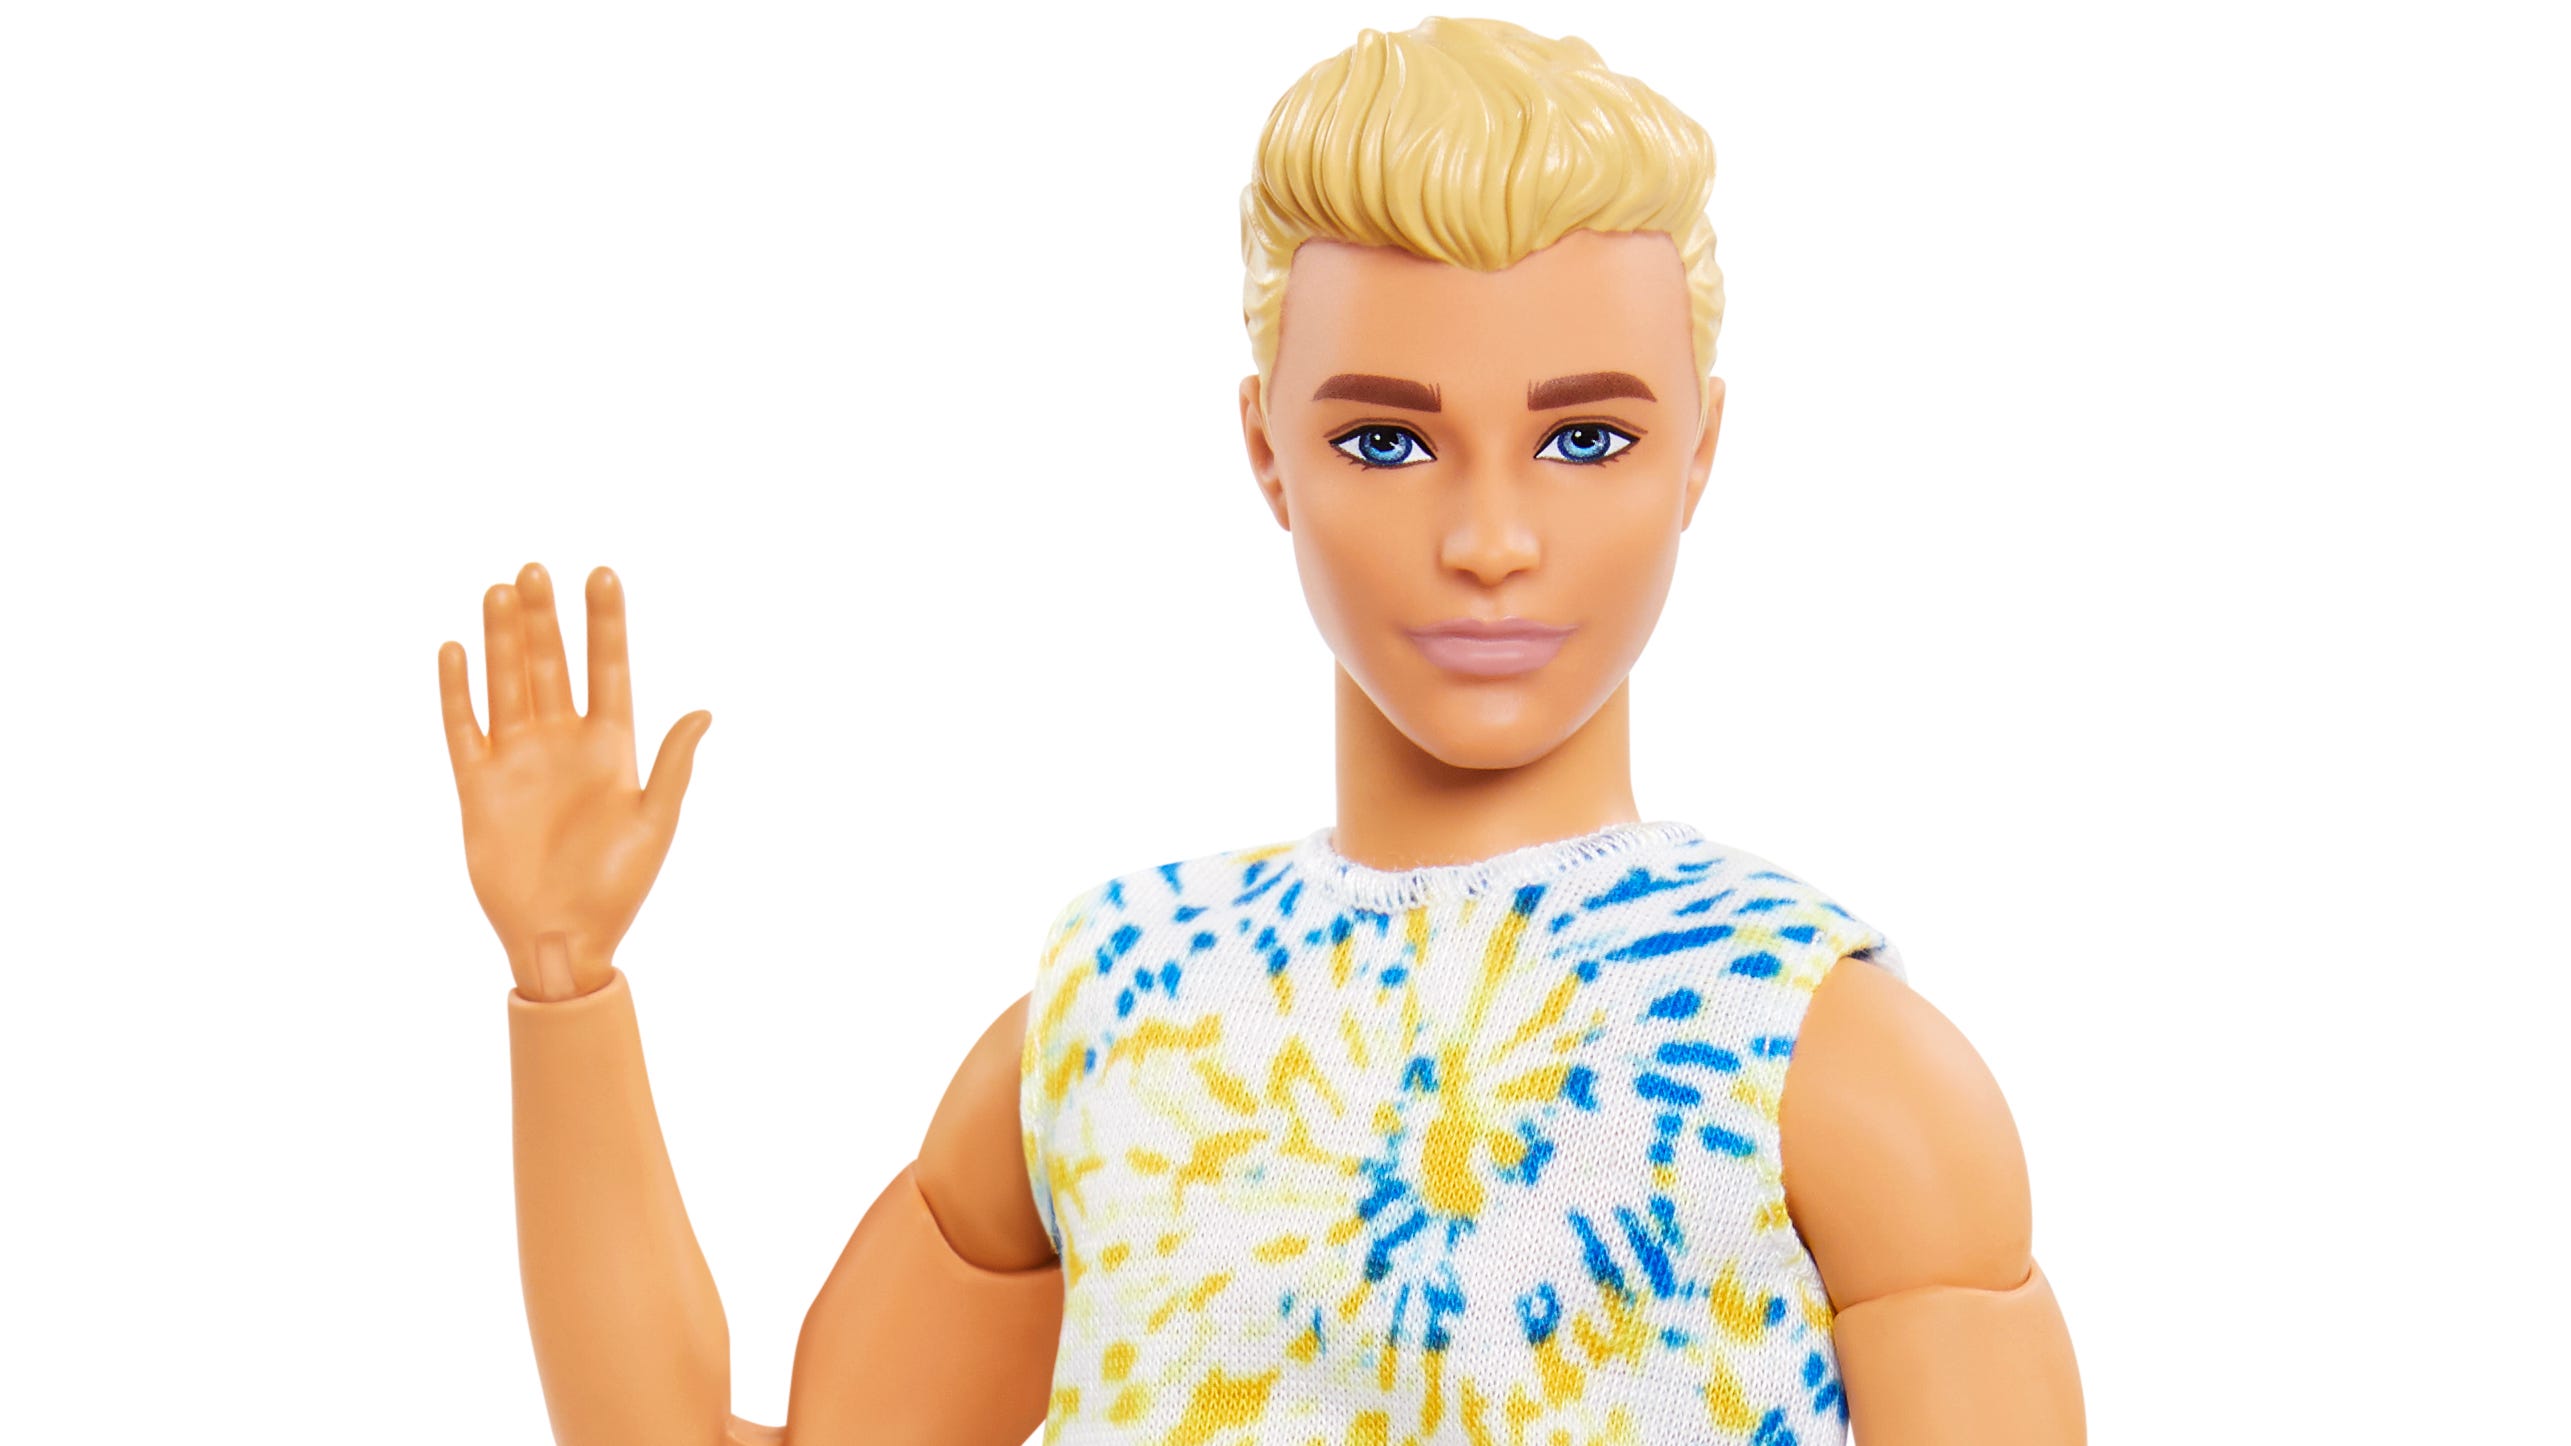 Ken Doll Turns 60 Barbie Counterpart Has Changed A Lot See How